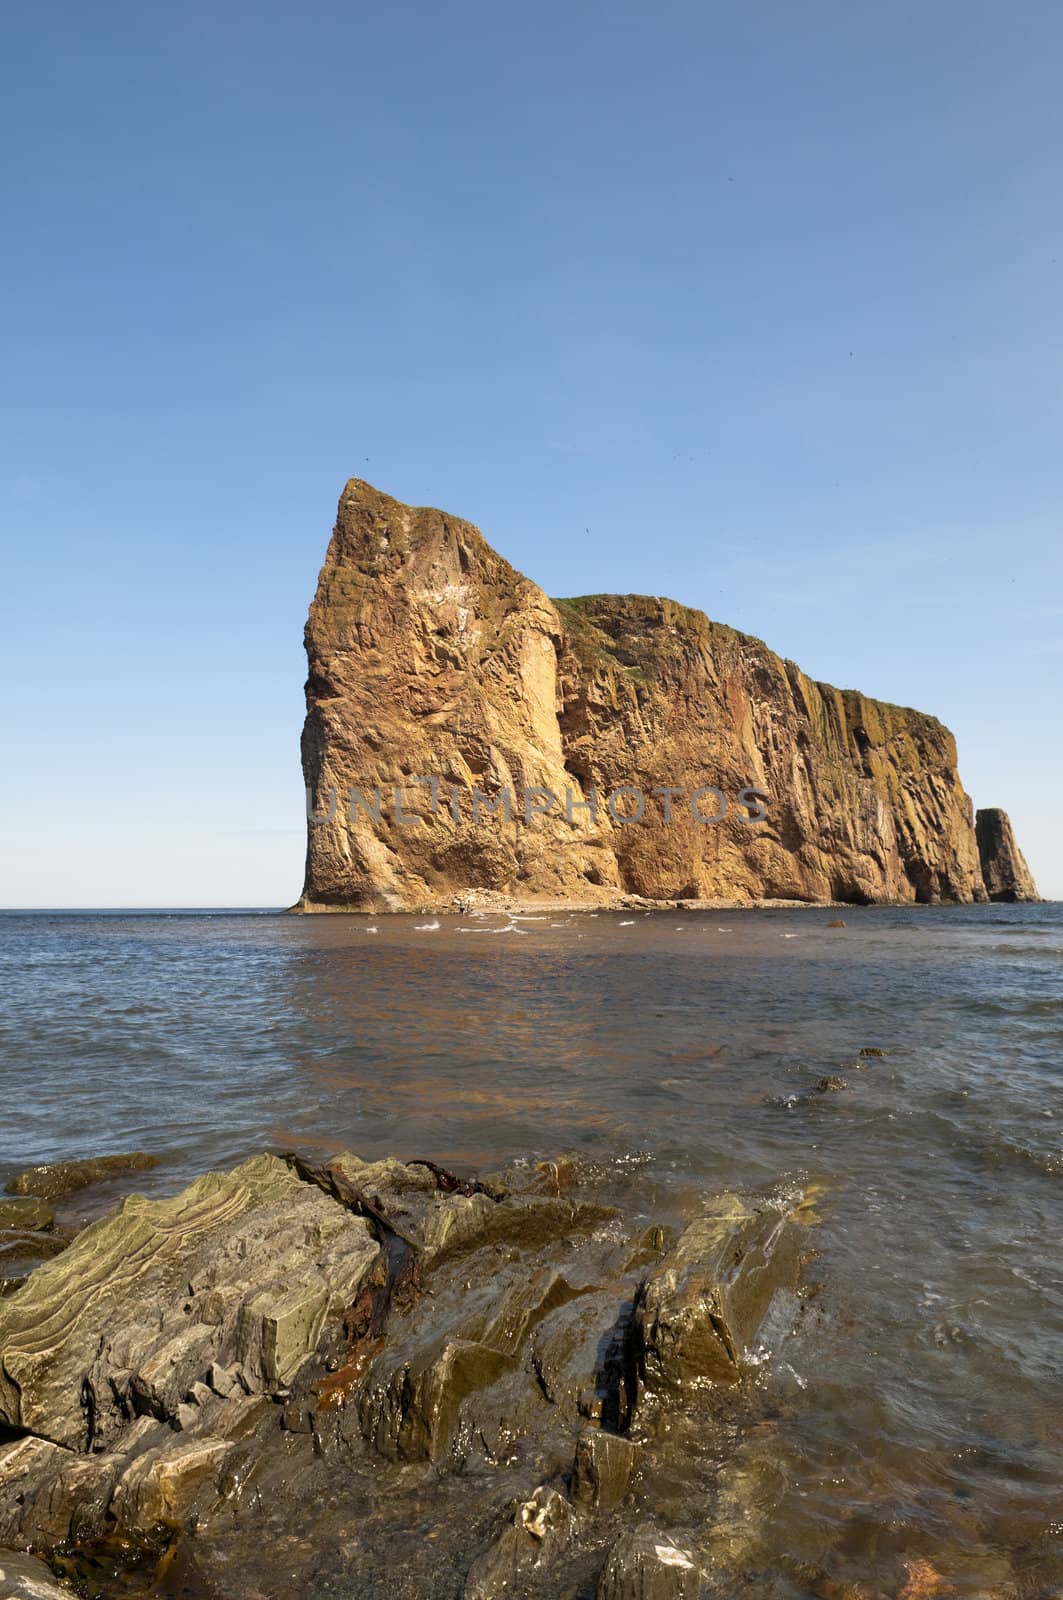 Perce Rock with copy space in the intense blue sky and rock formation in the foreground